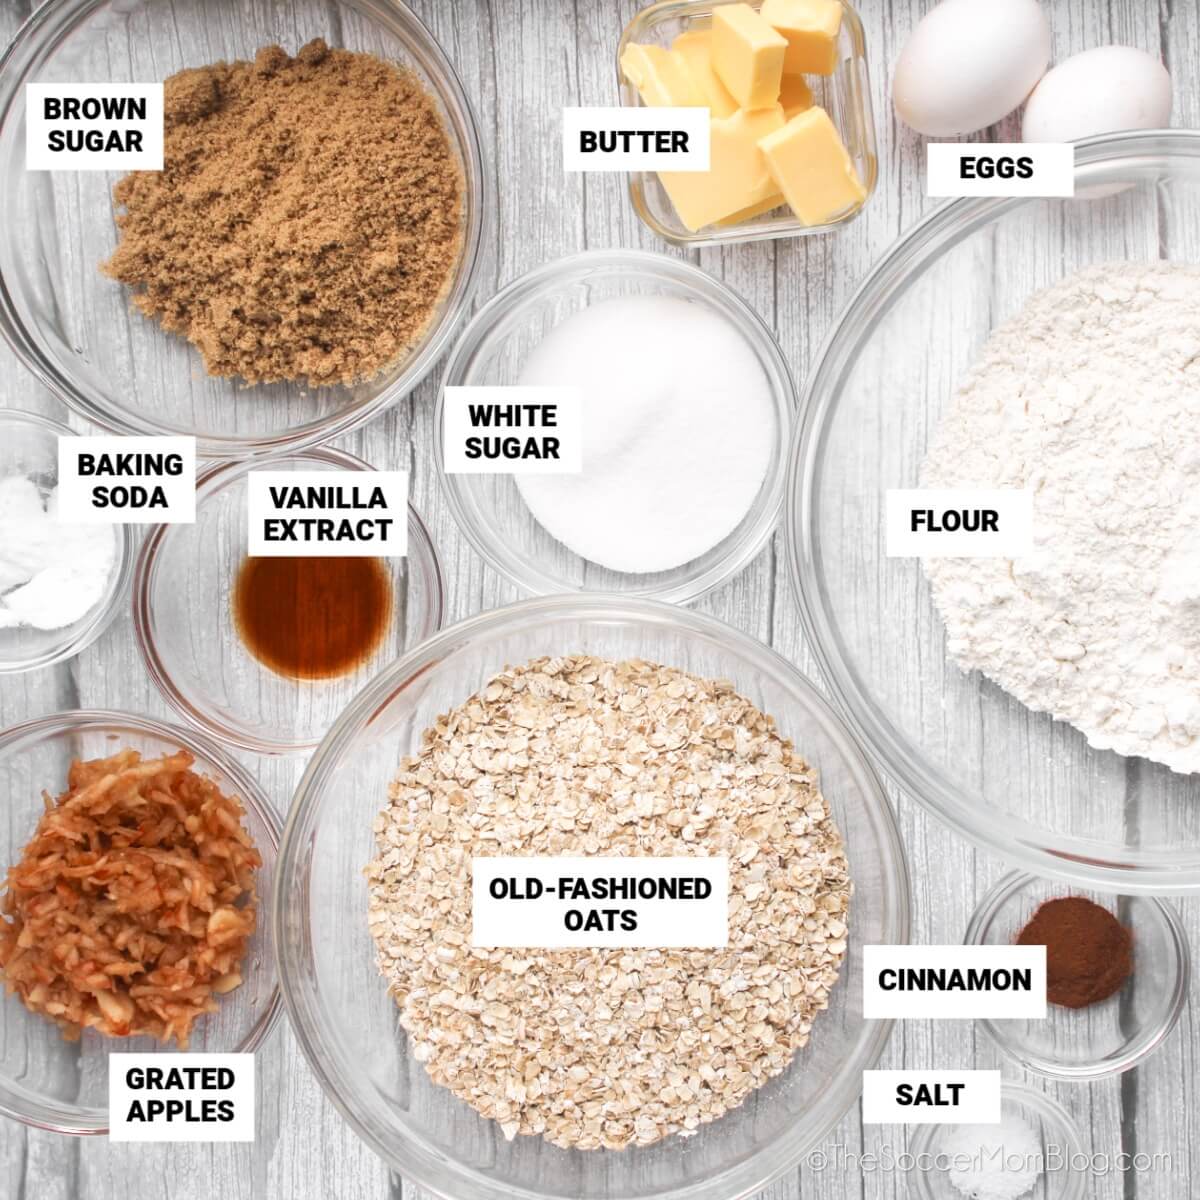 apple oatmeal cookie ingredients, with text labels: brown sugar, butter, eggs, flour, white sugar, vanilla extract, baking soda, grated apples, old-fashioned oats, cinnamon, salt